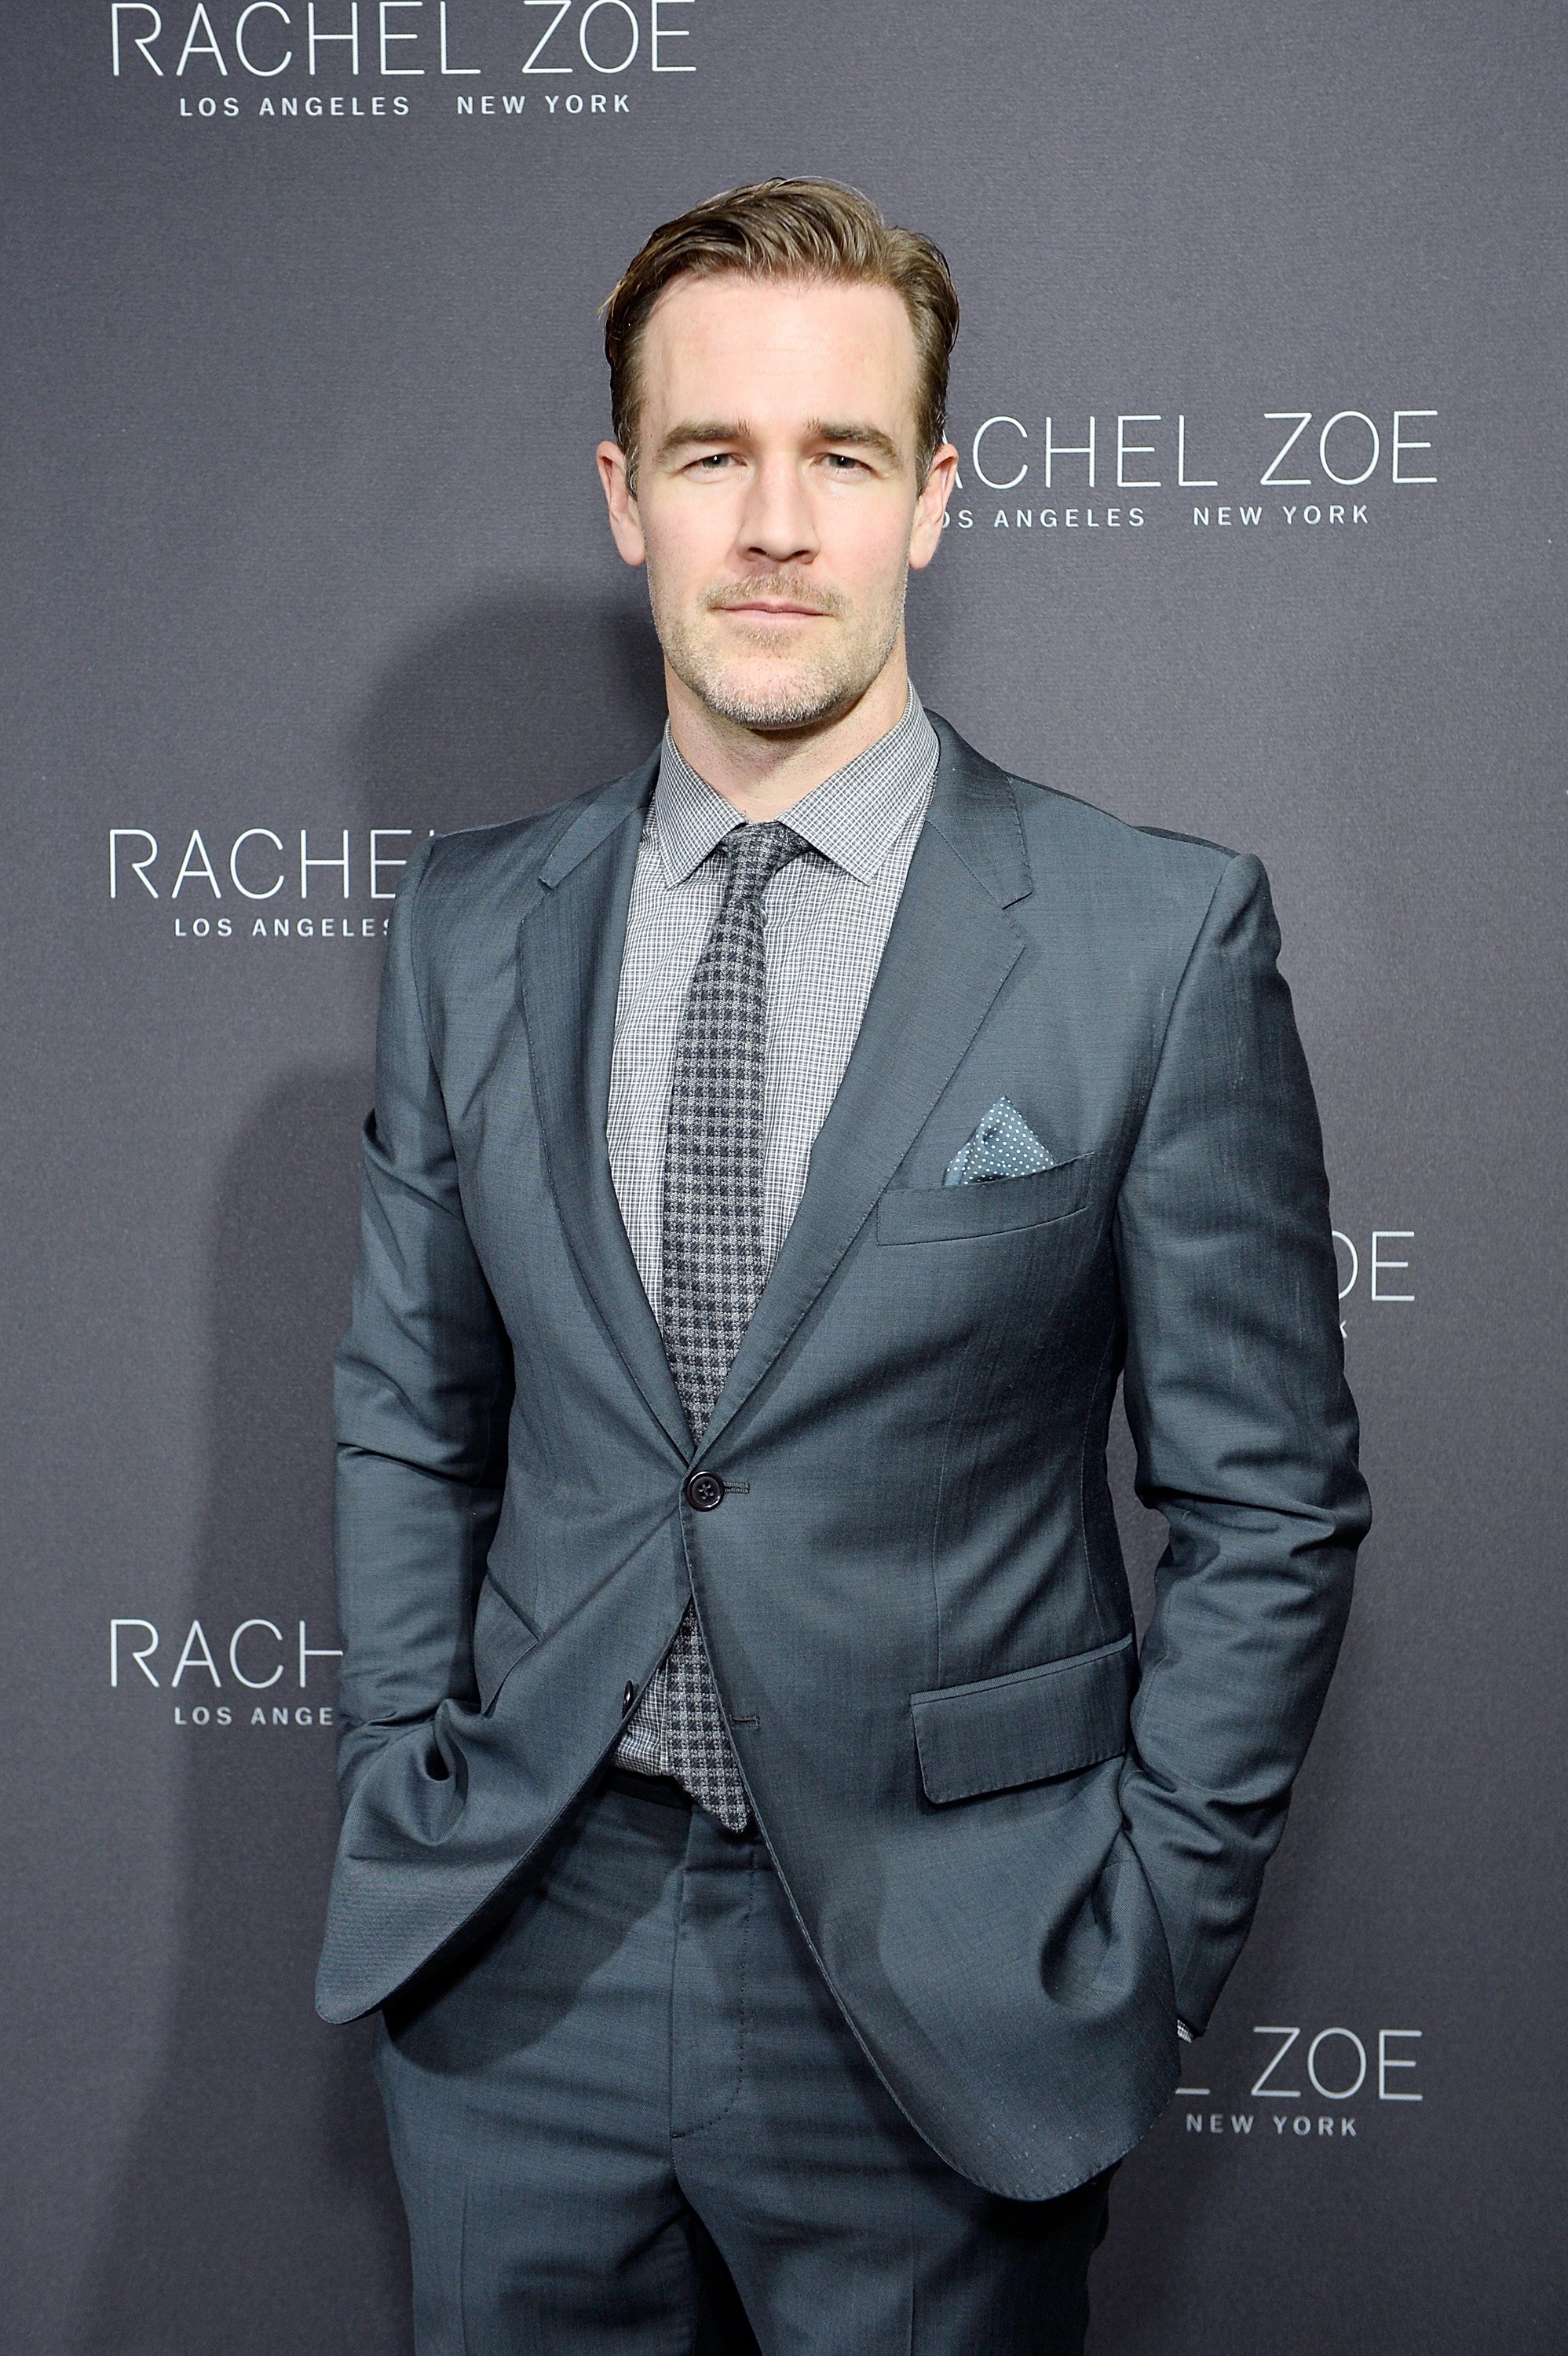 James Van Der Beek at Sunset Tower Hotel on February 6, 2017 | Photo: Getty Images